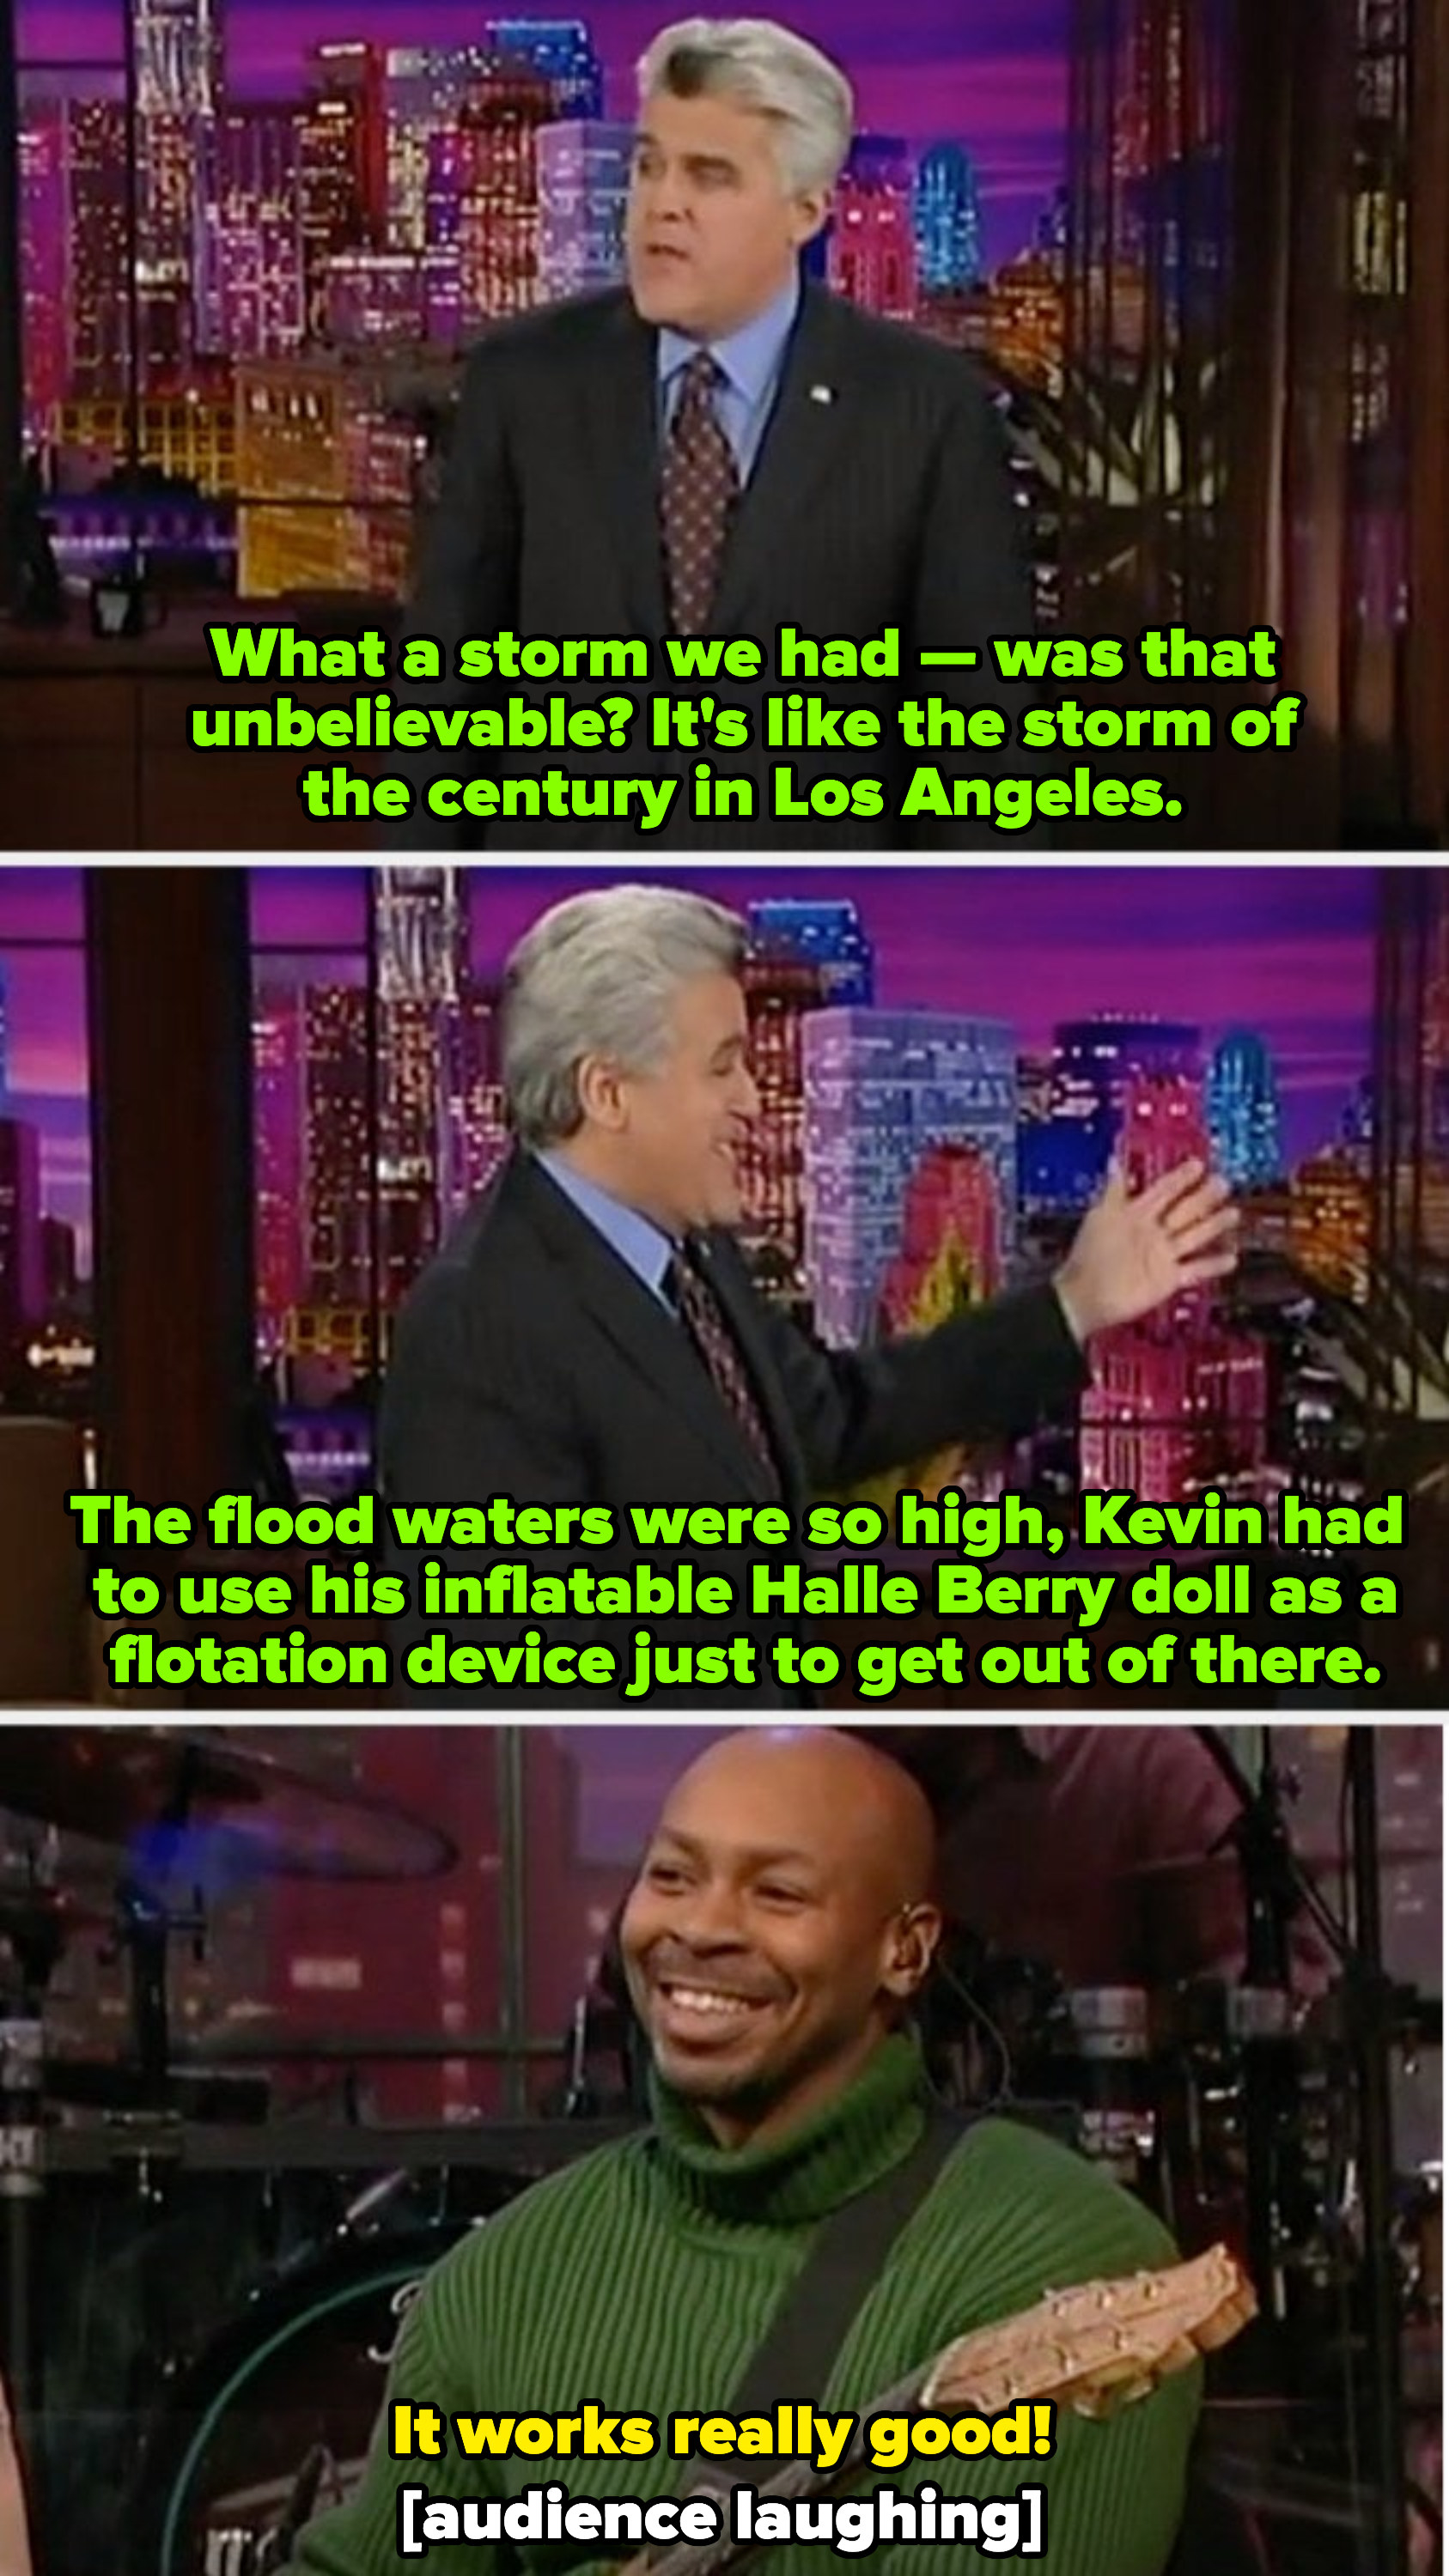 Jay Leno commenting that his band leader used a Halle Berry sex doll as a flotation device during the Los Angeles storm